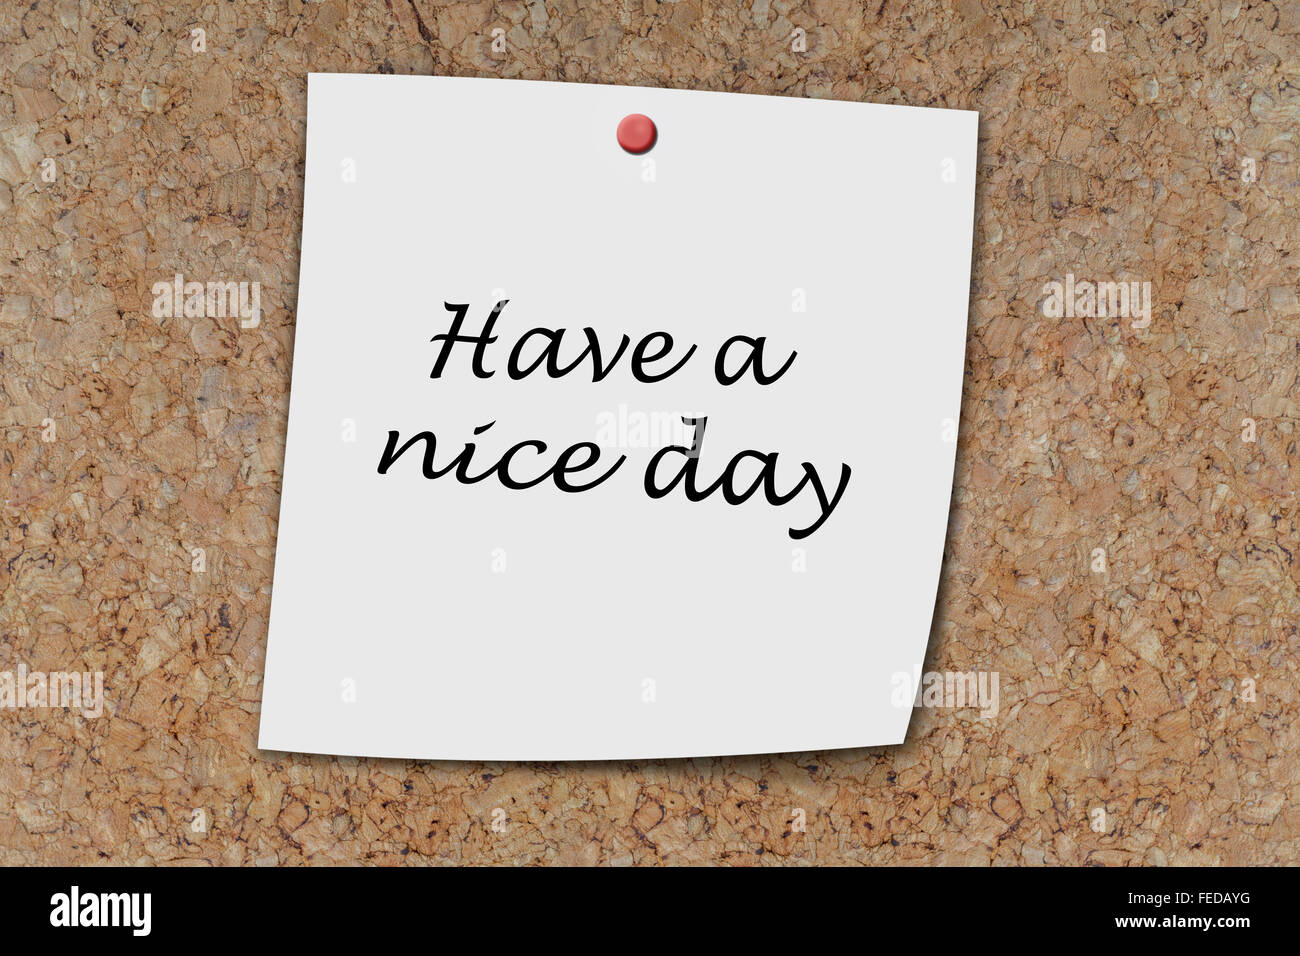 have a nice day written on a memo pinned on a cork board Stock Photo